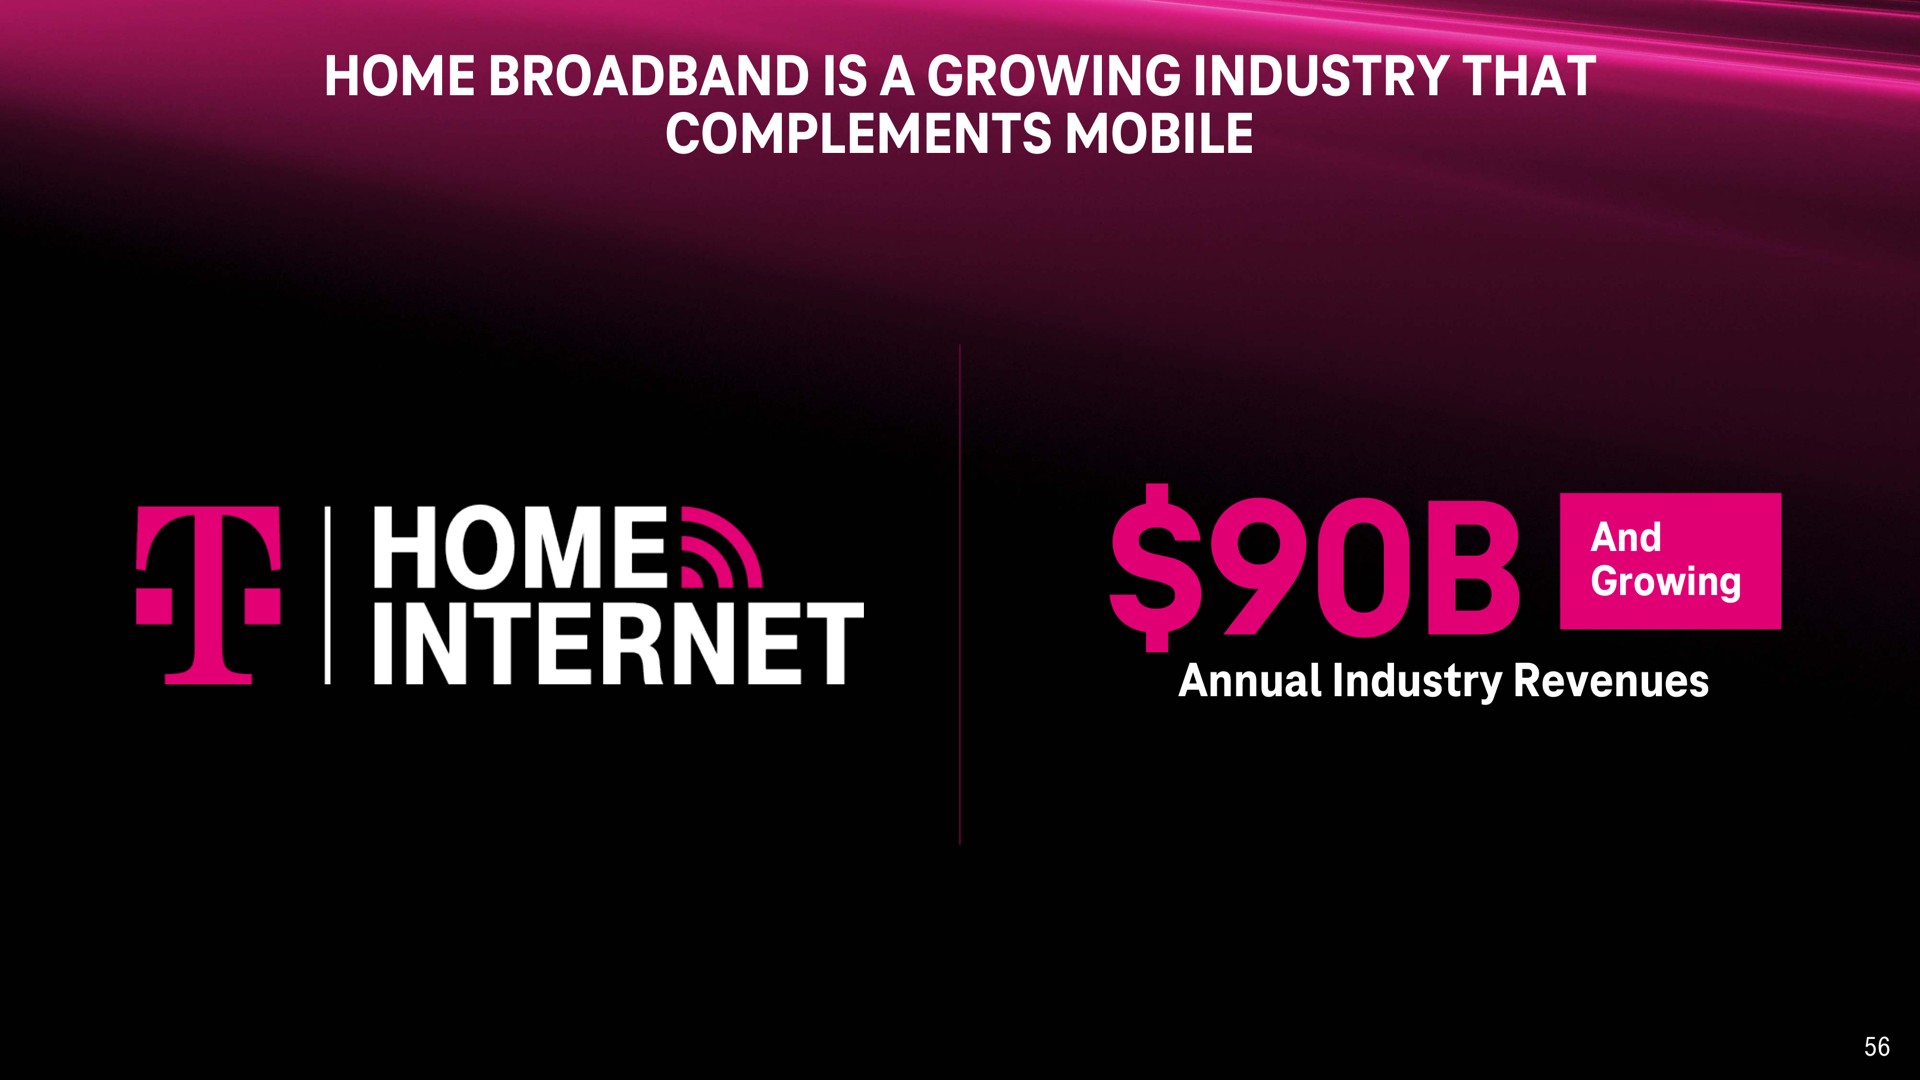 home is a growing industry that complements mobile industry revenues | T-Mobile